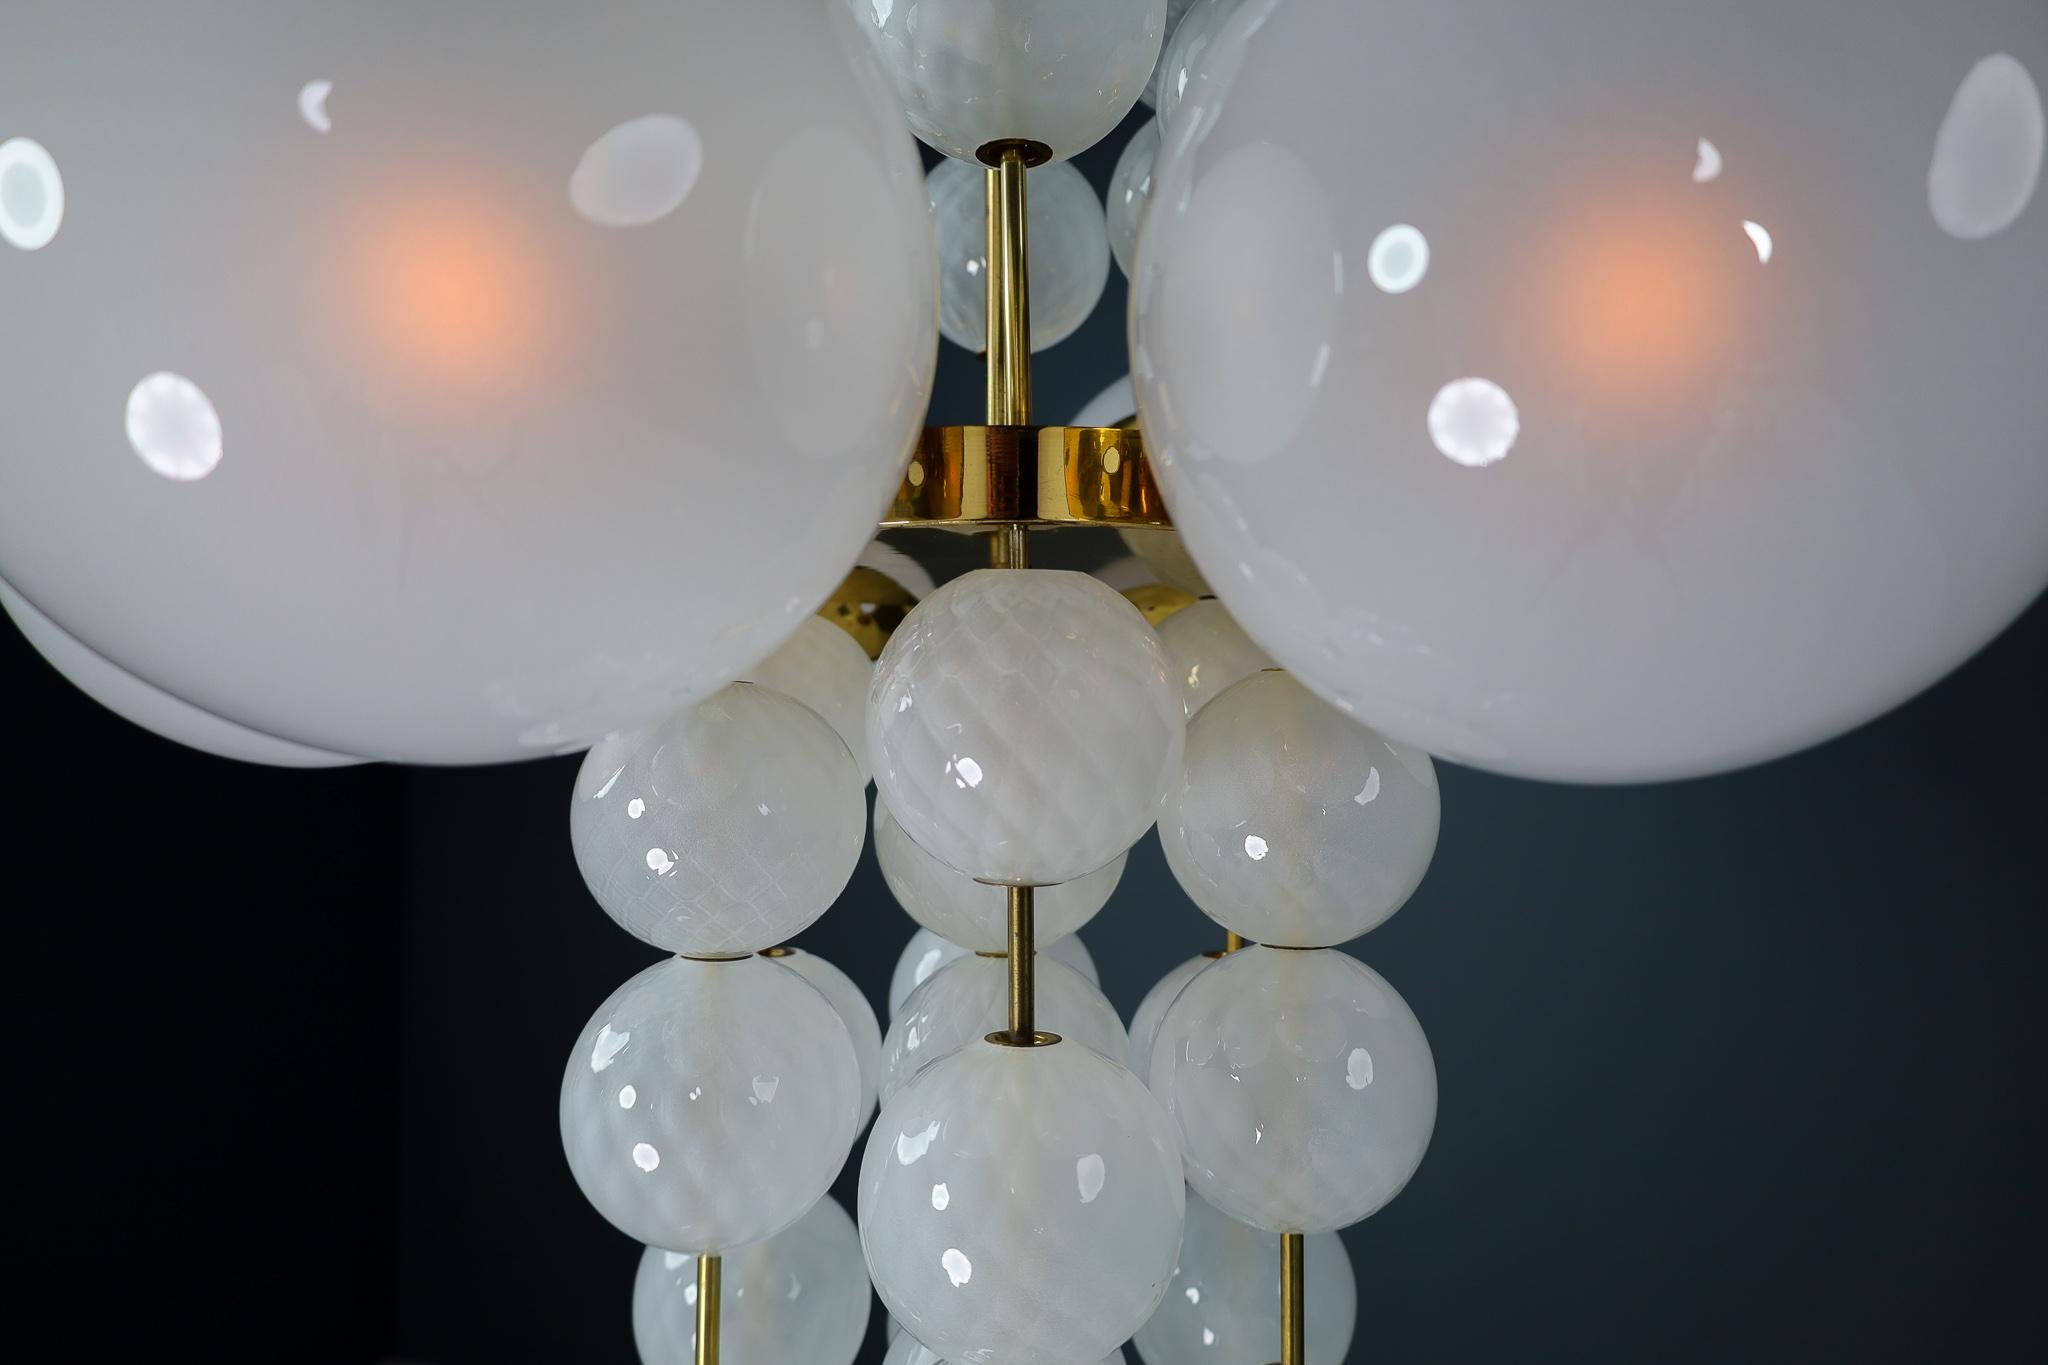 Set of 3 XL Hotel Chandeliers with Brass Fixture and Hand-Blowed Glass Globes 5